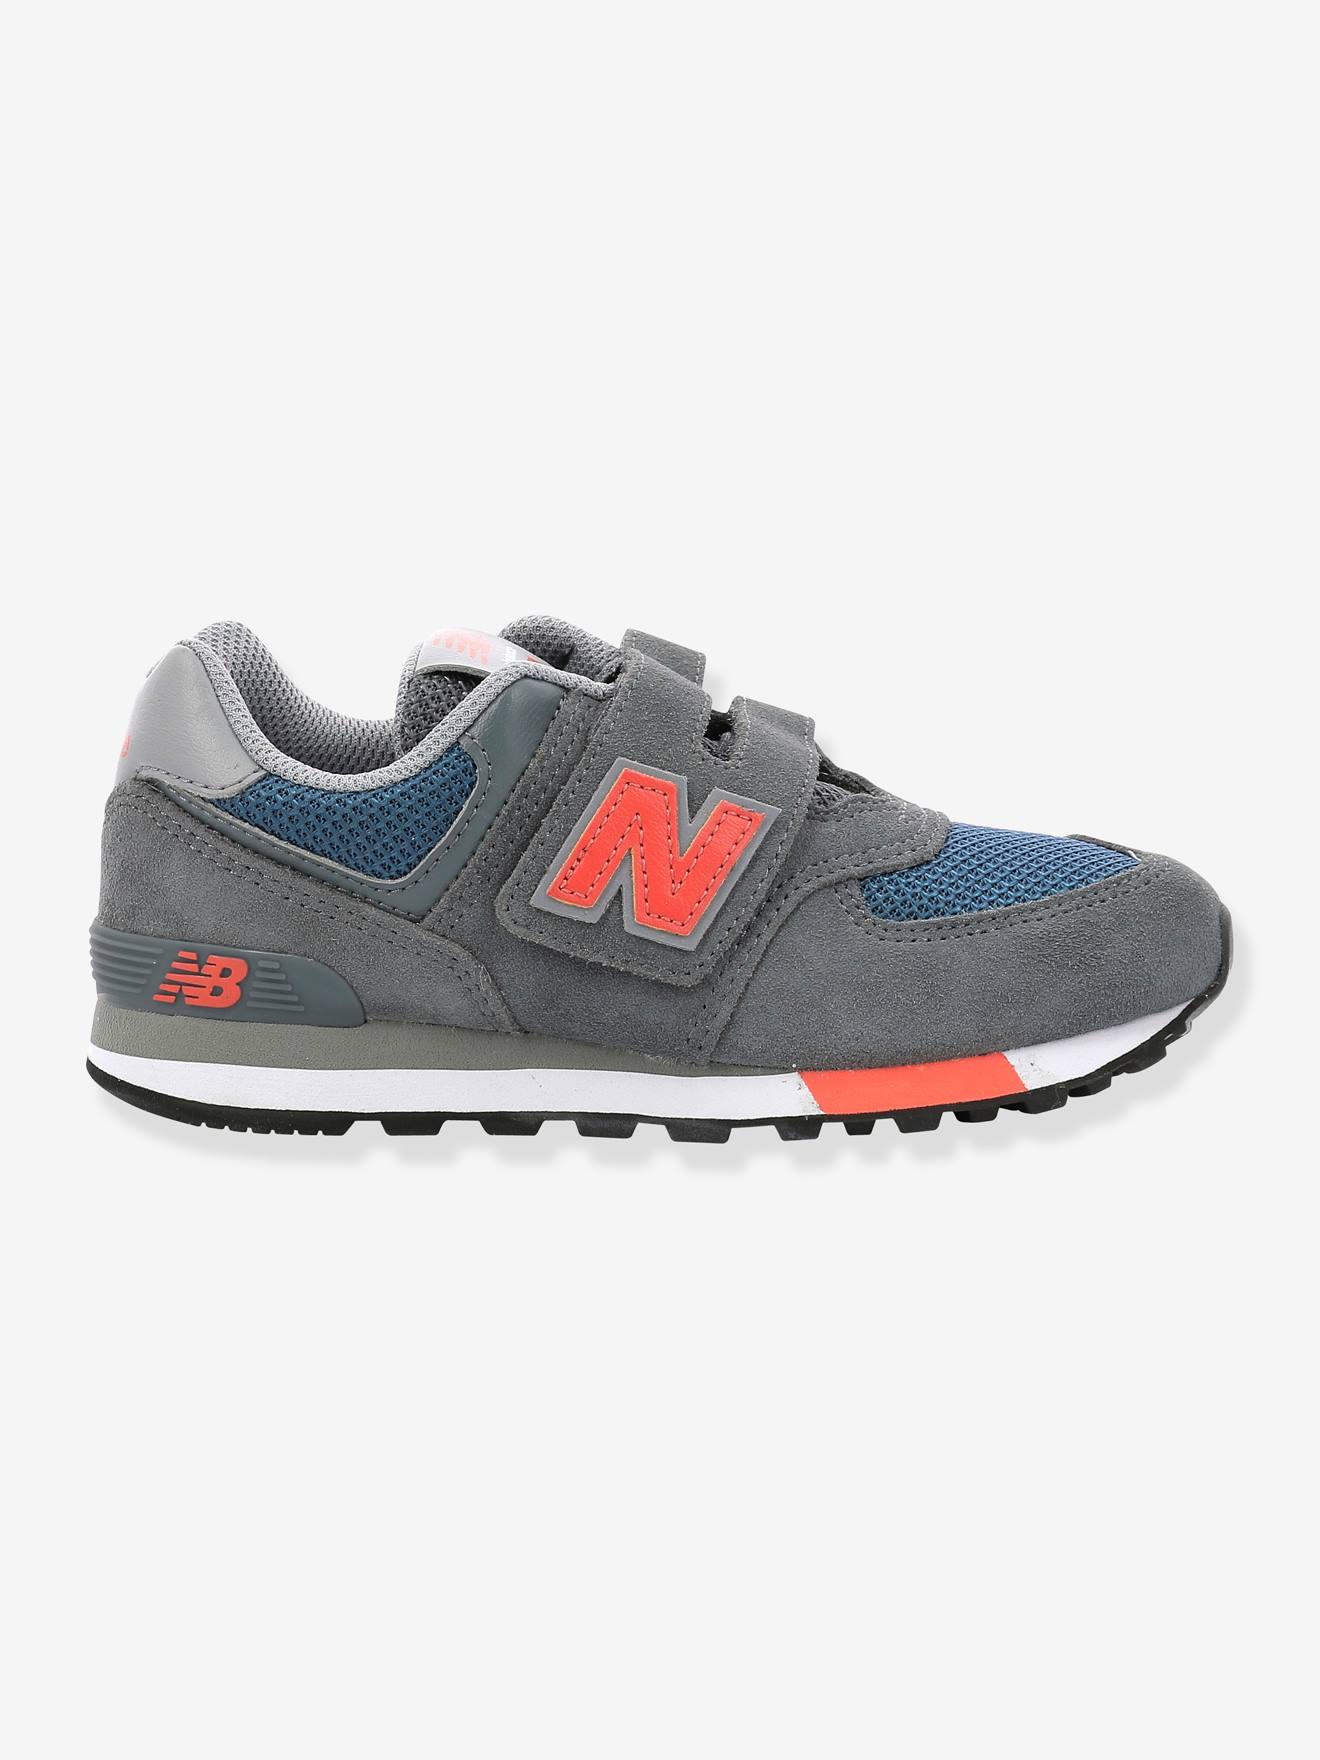 Soldes > new balance garcon taille 32 > en stock